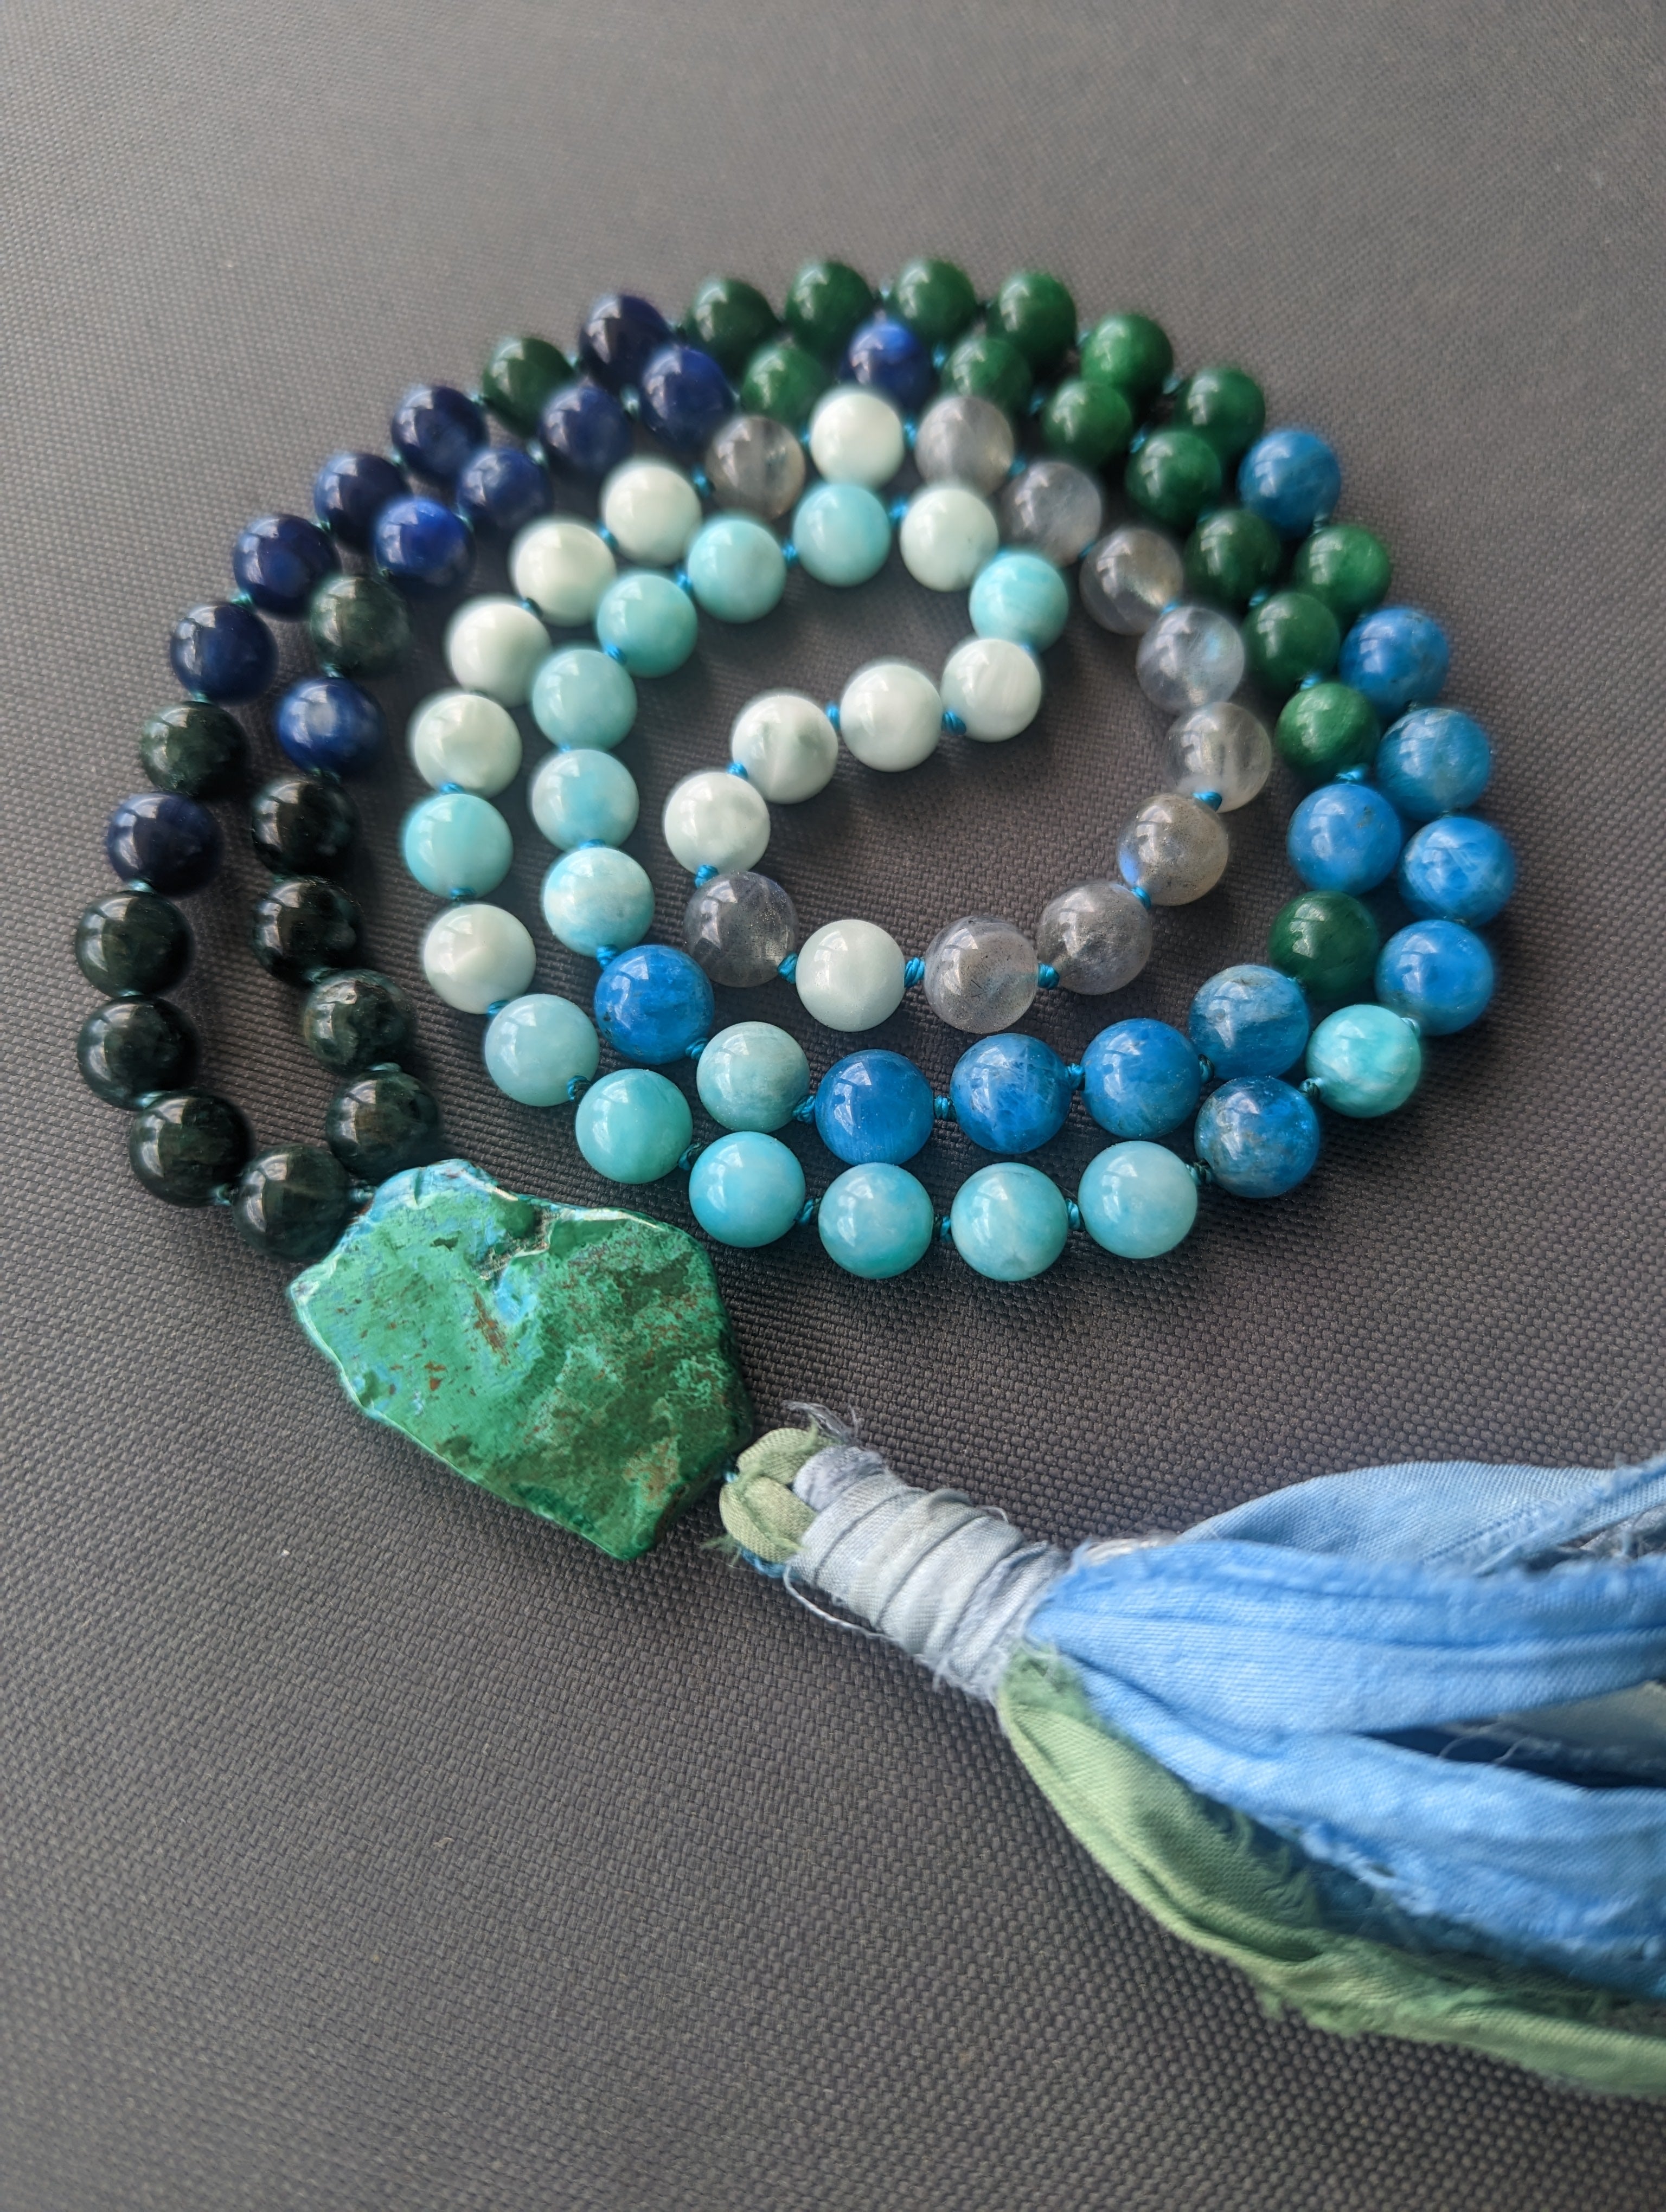 Buy Green Angelite Beads for Mala Necklaces!